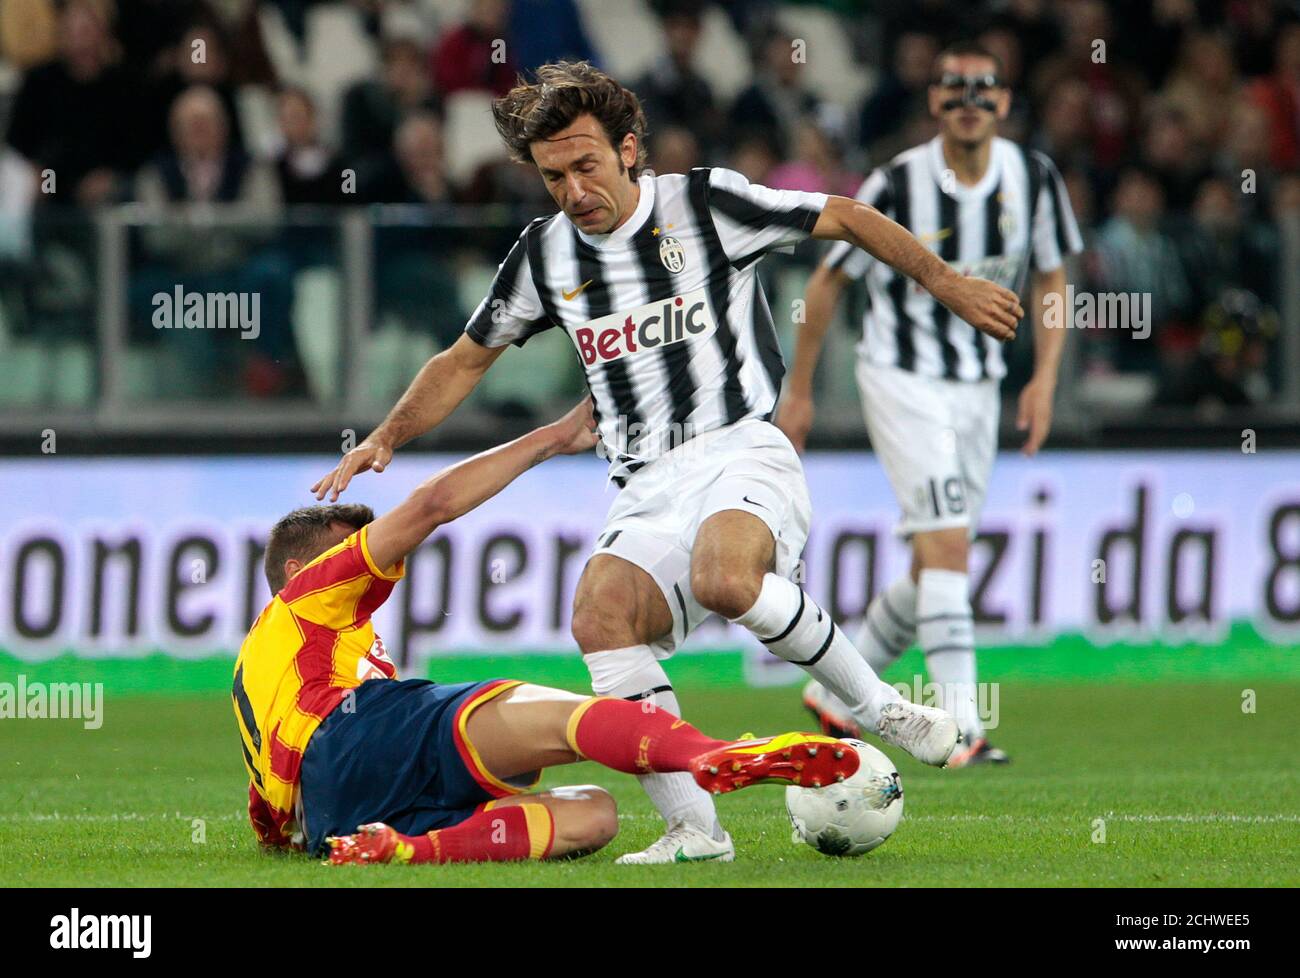 Andrea Pirlo Juventus High Resolution Stock Photography and Images - Alamy